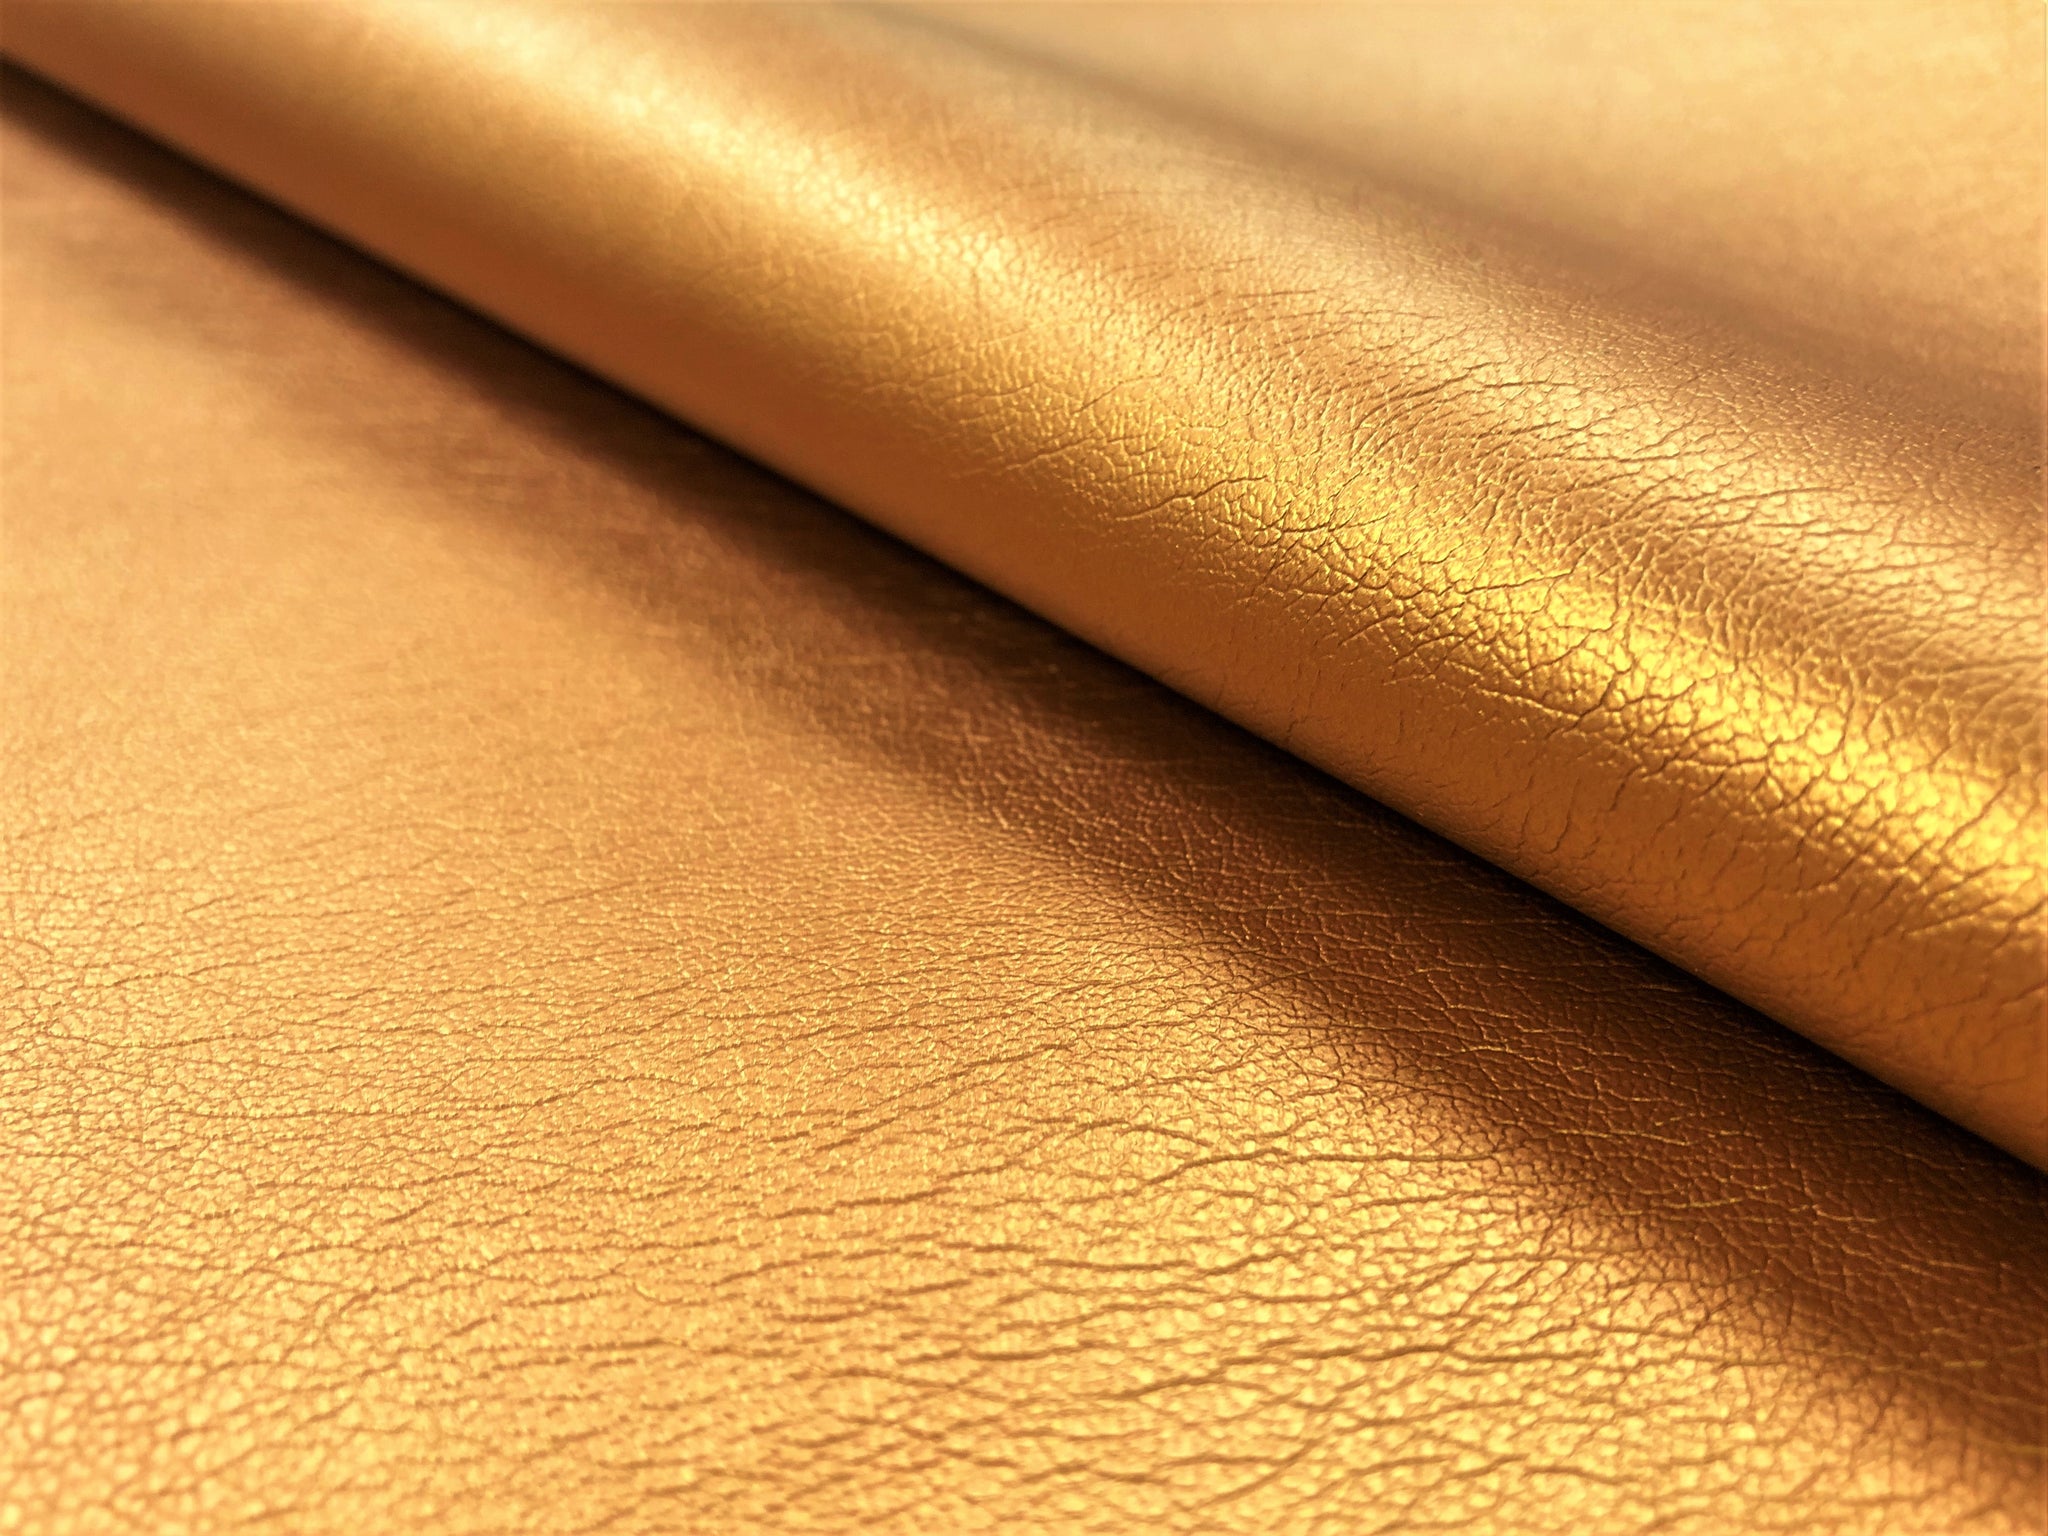 Bronze Foil Metallic Leather Piece Cutting 2.5-3.0 Oz Genuine Leather  Upholstery Craft Handbag Cowhide NAT Leathers 